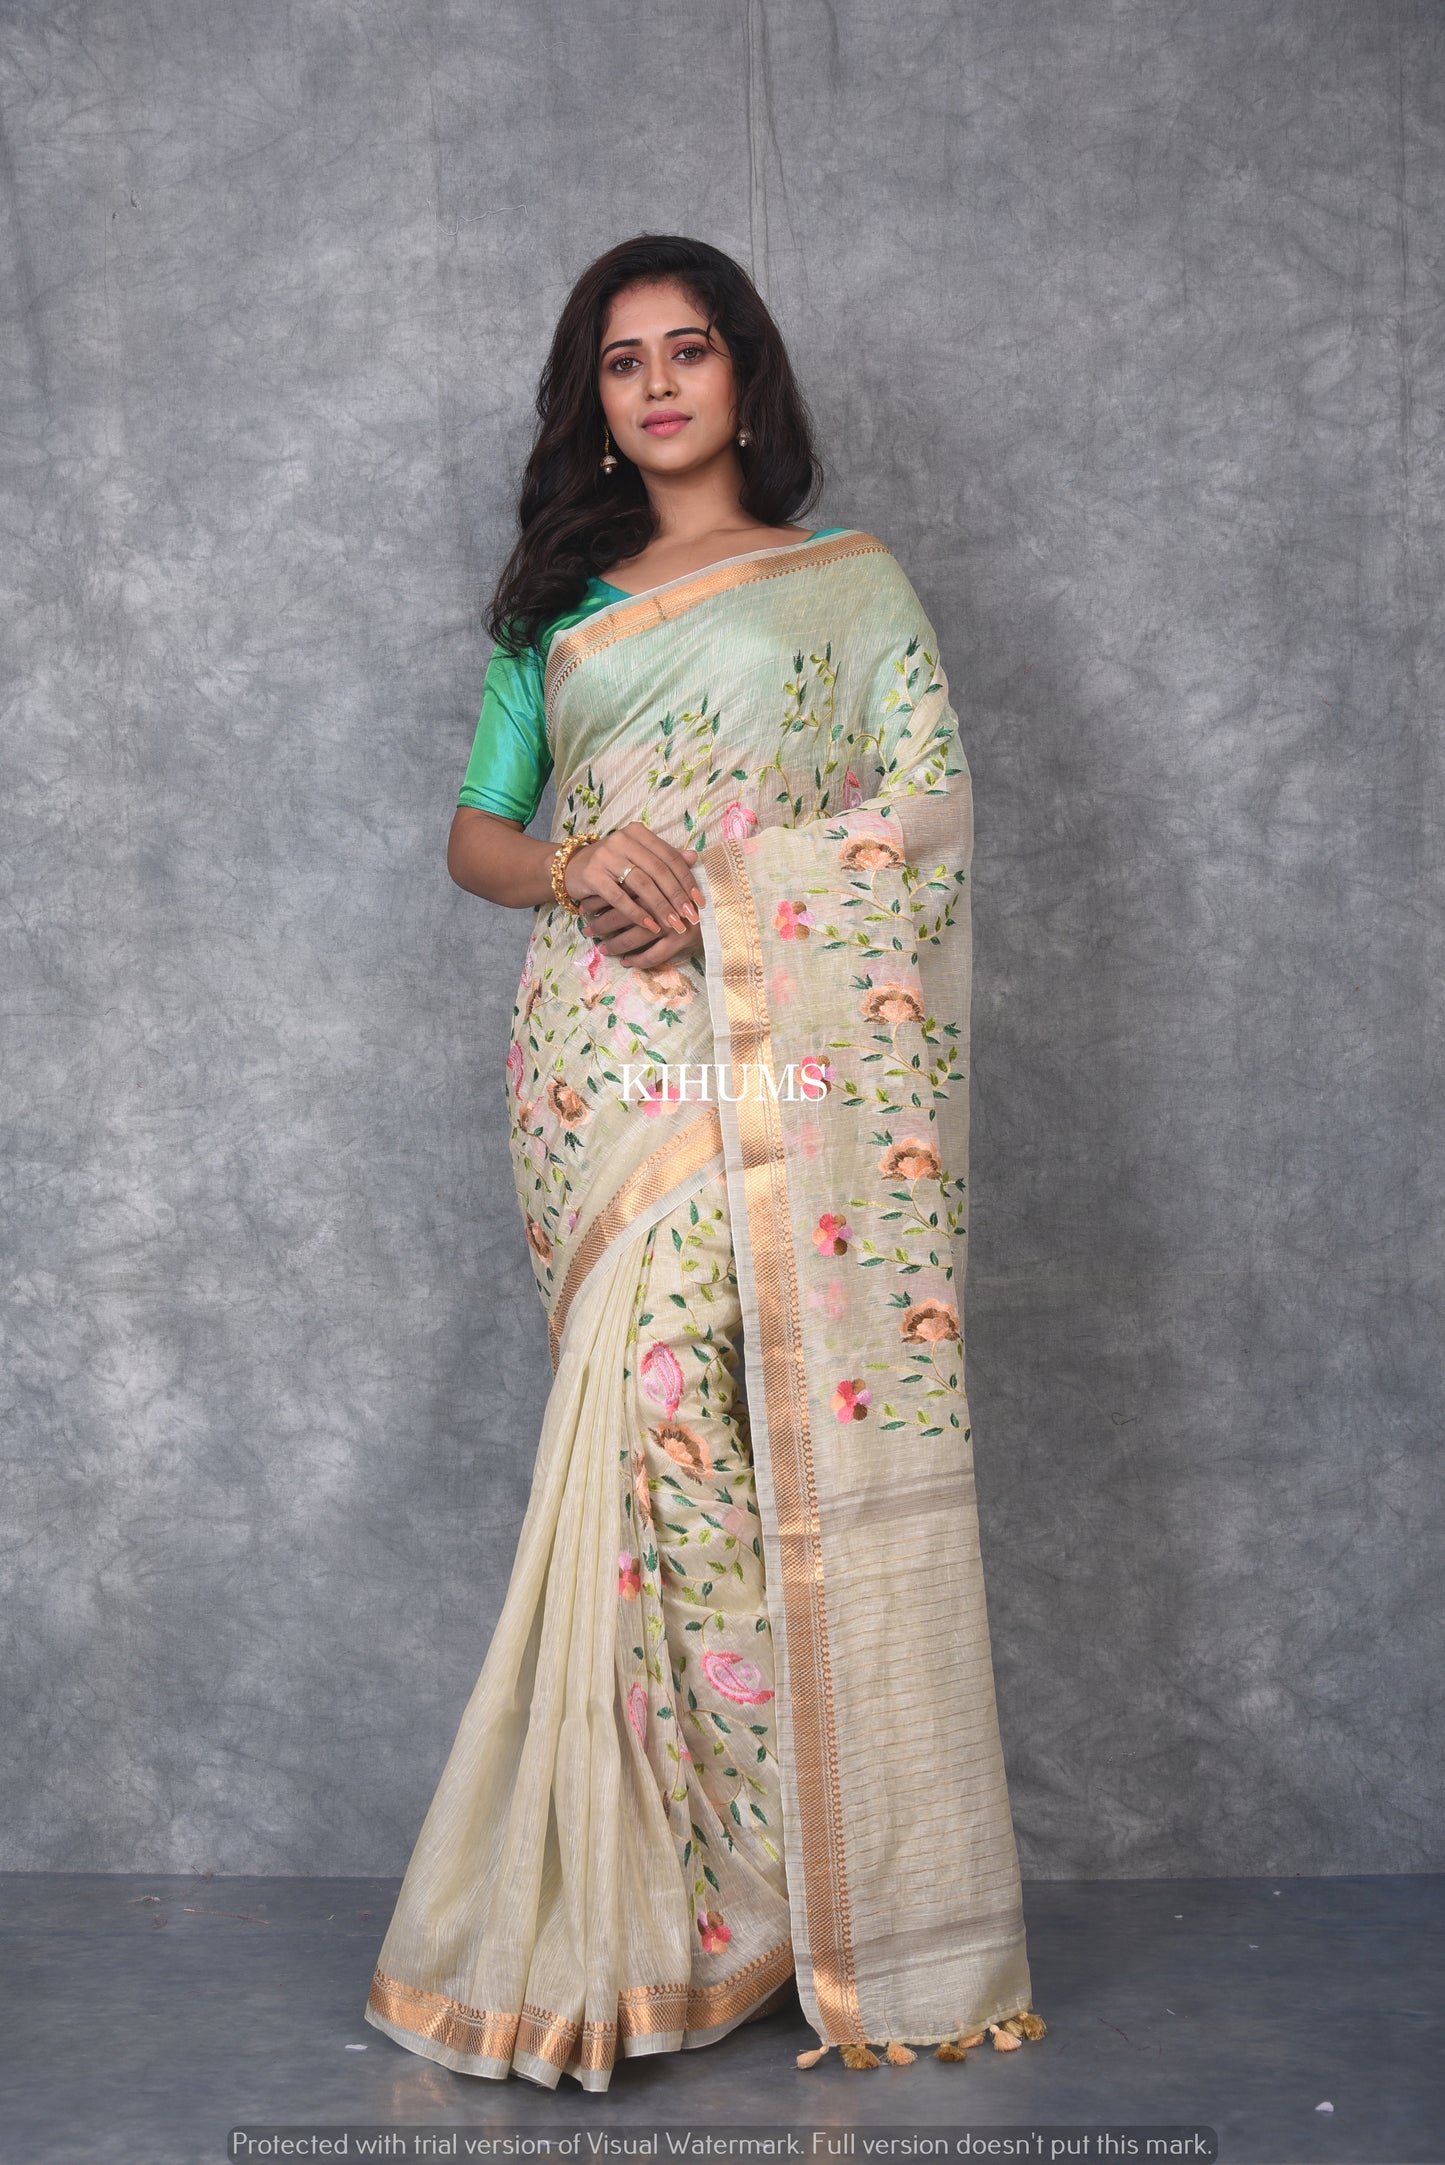 Cream Silk Linen with Floral Embroidery | KIHUMS Saree